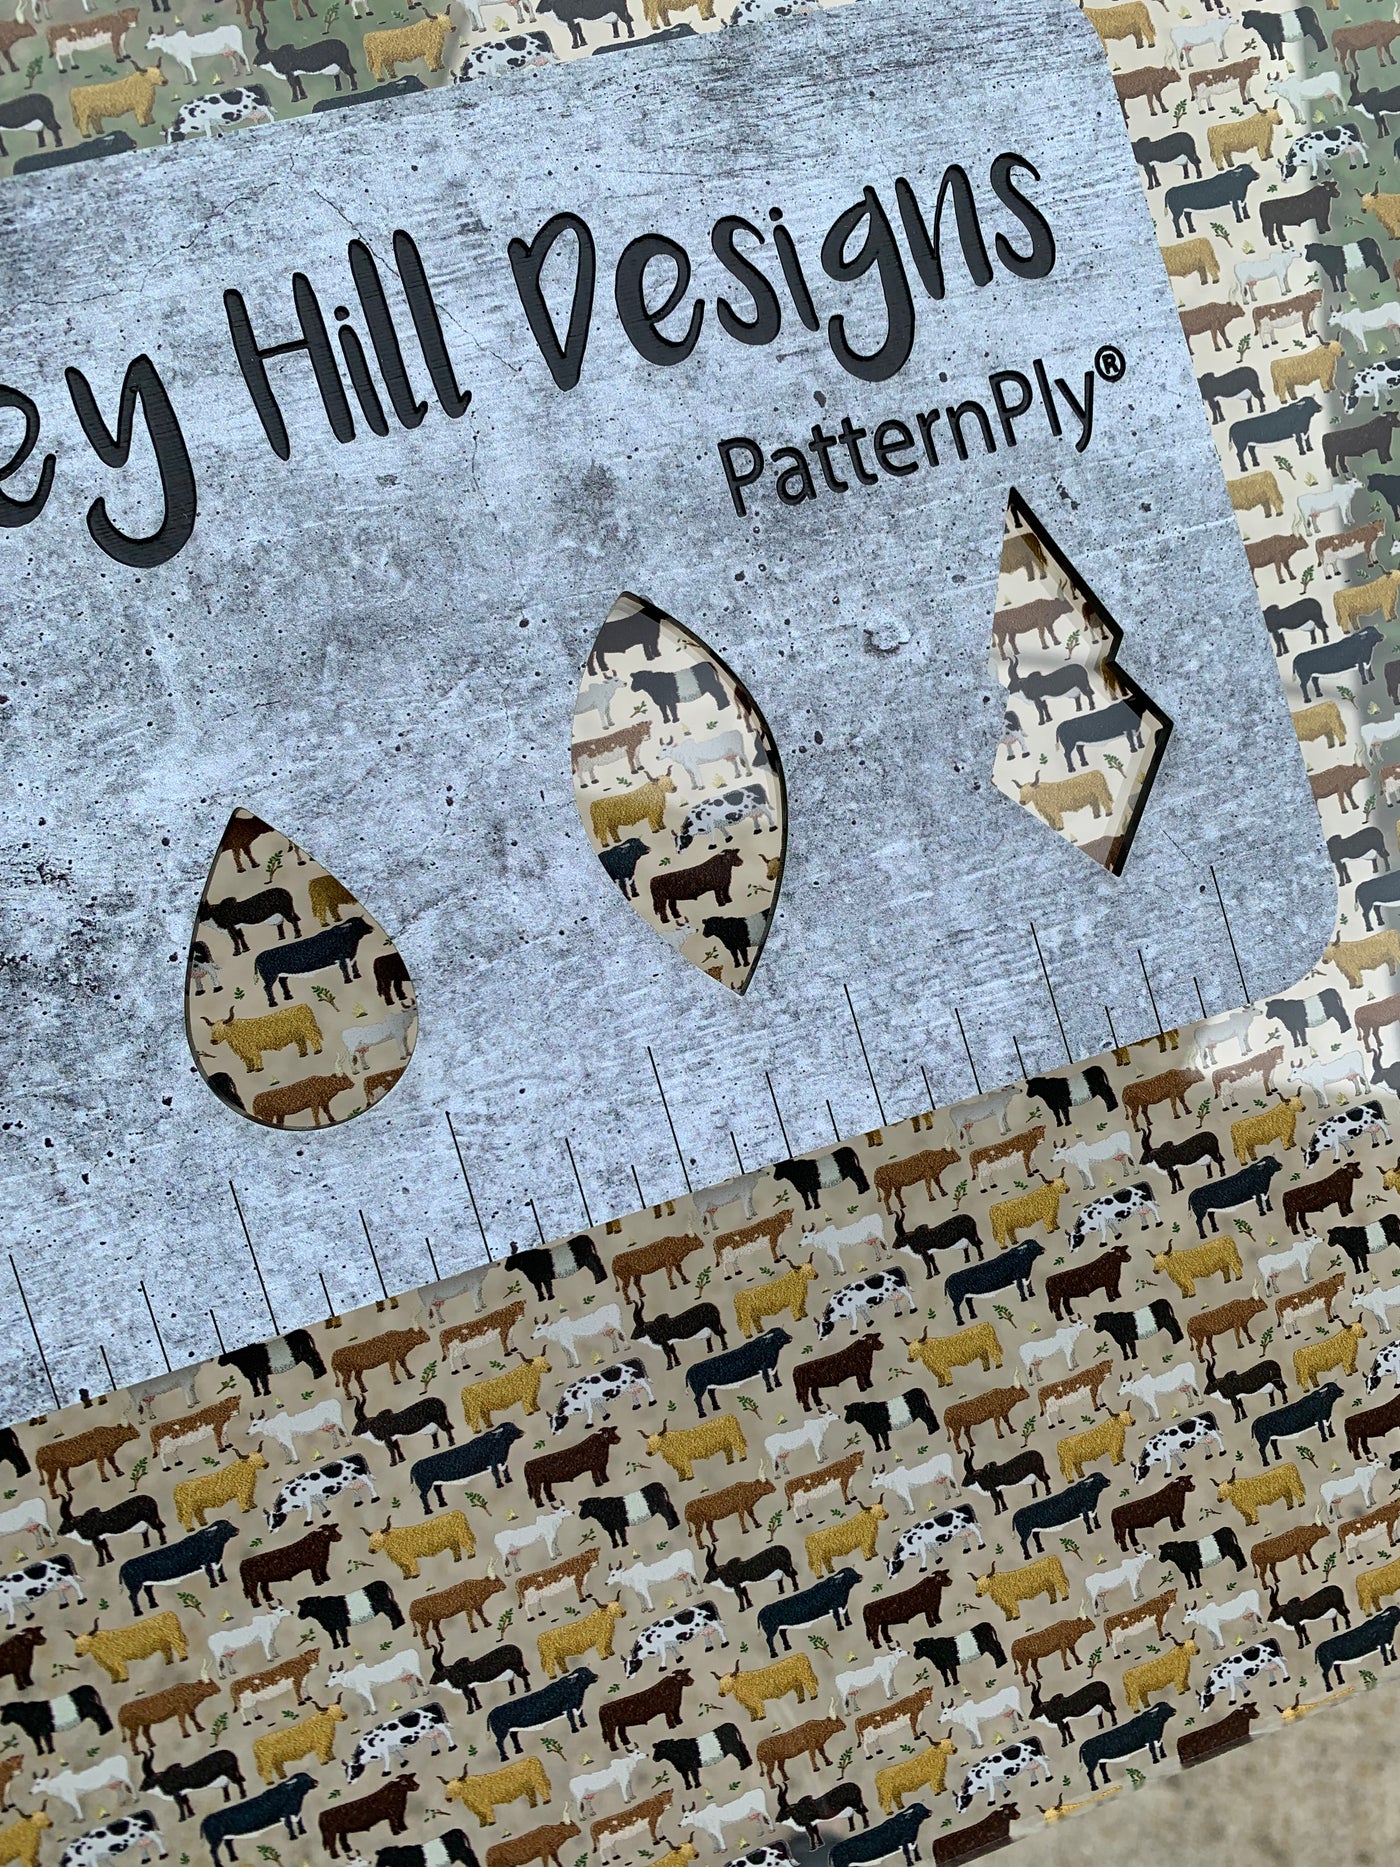 PatternPly® Scattered Cows and Bulls